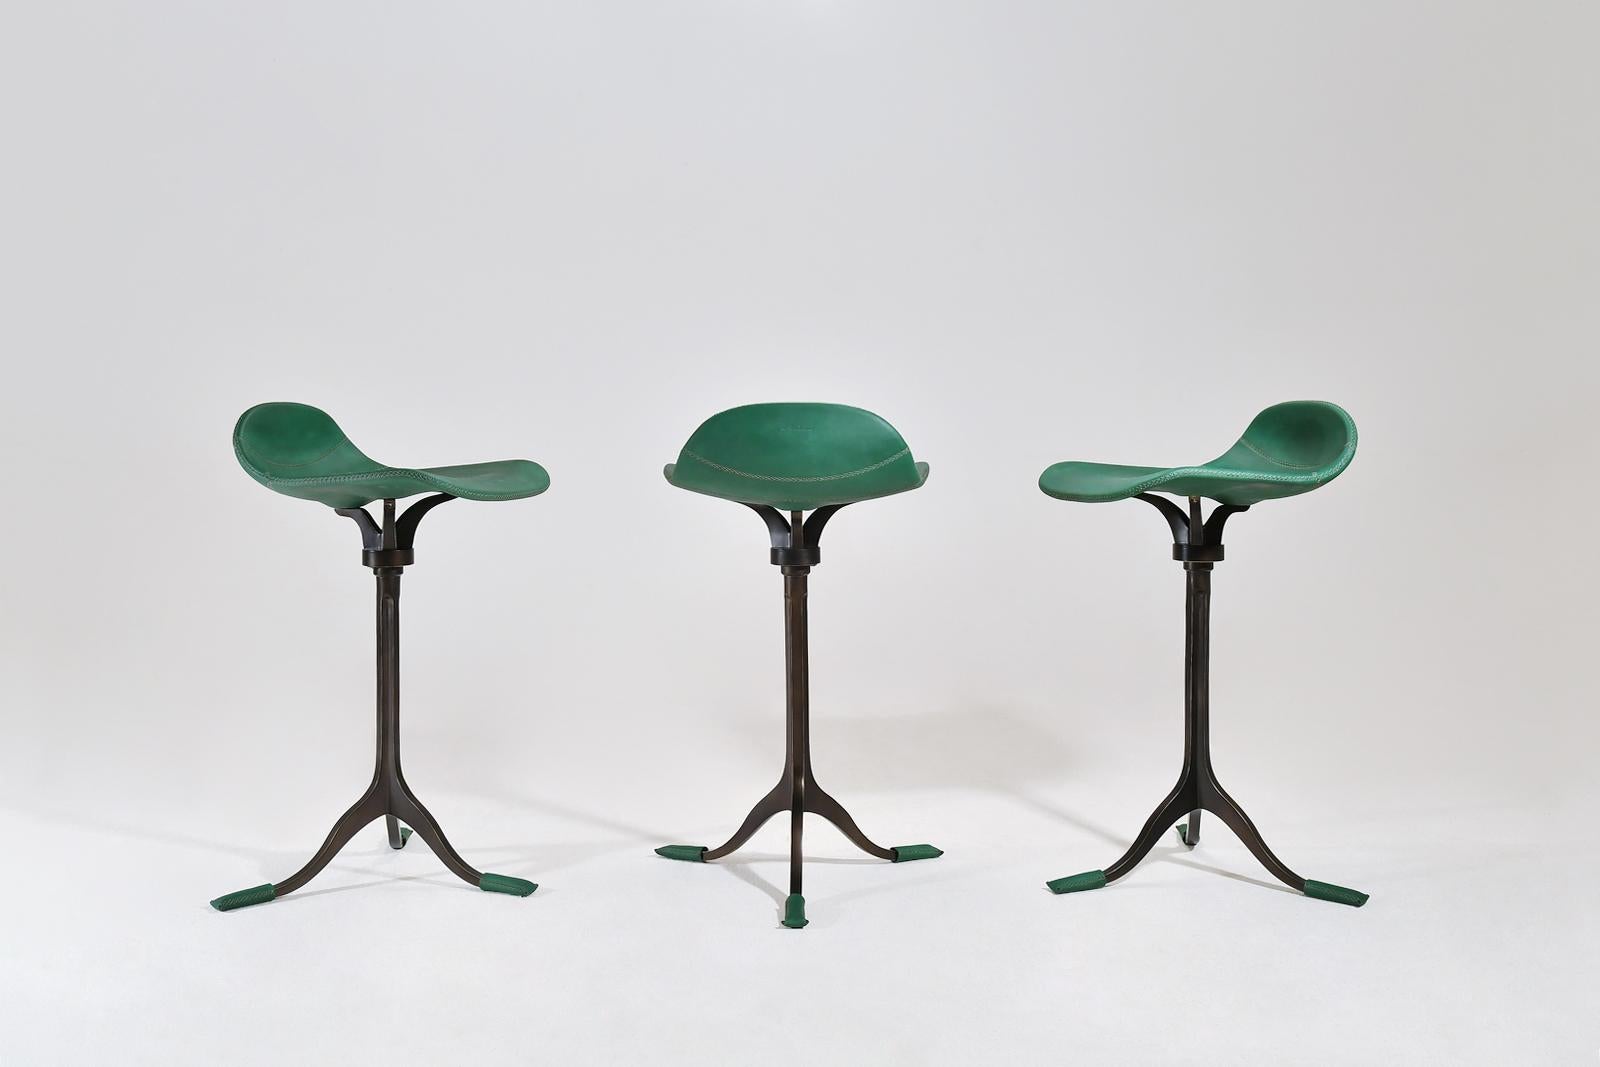 Three counter stools, brass and leather, by P. Tendercool
 
These barstools in green leather and blackened-brown brass combo were commission by an Italian businessman for his loft in Bangkok.
Since these are made-to-order they are available in